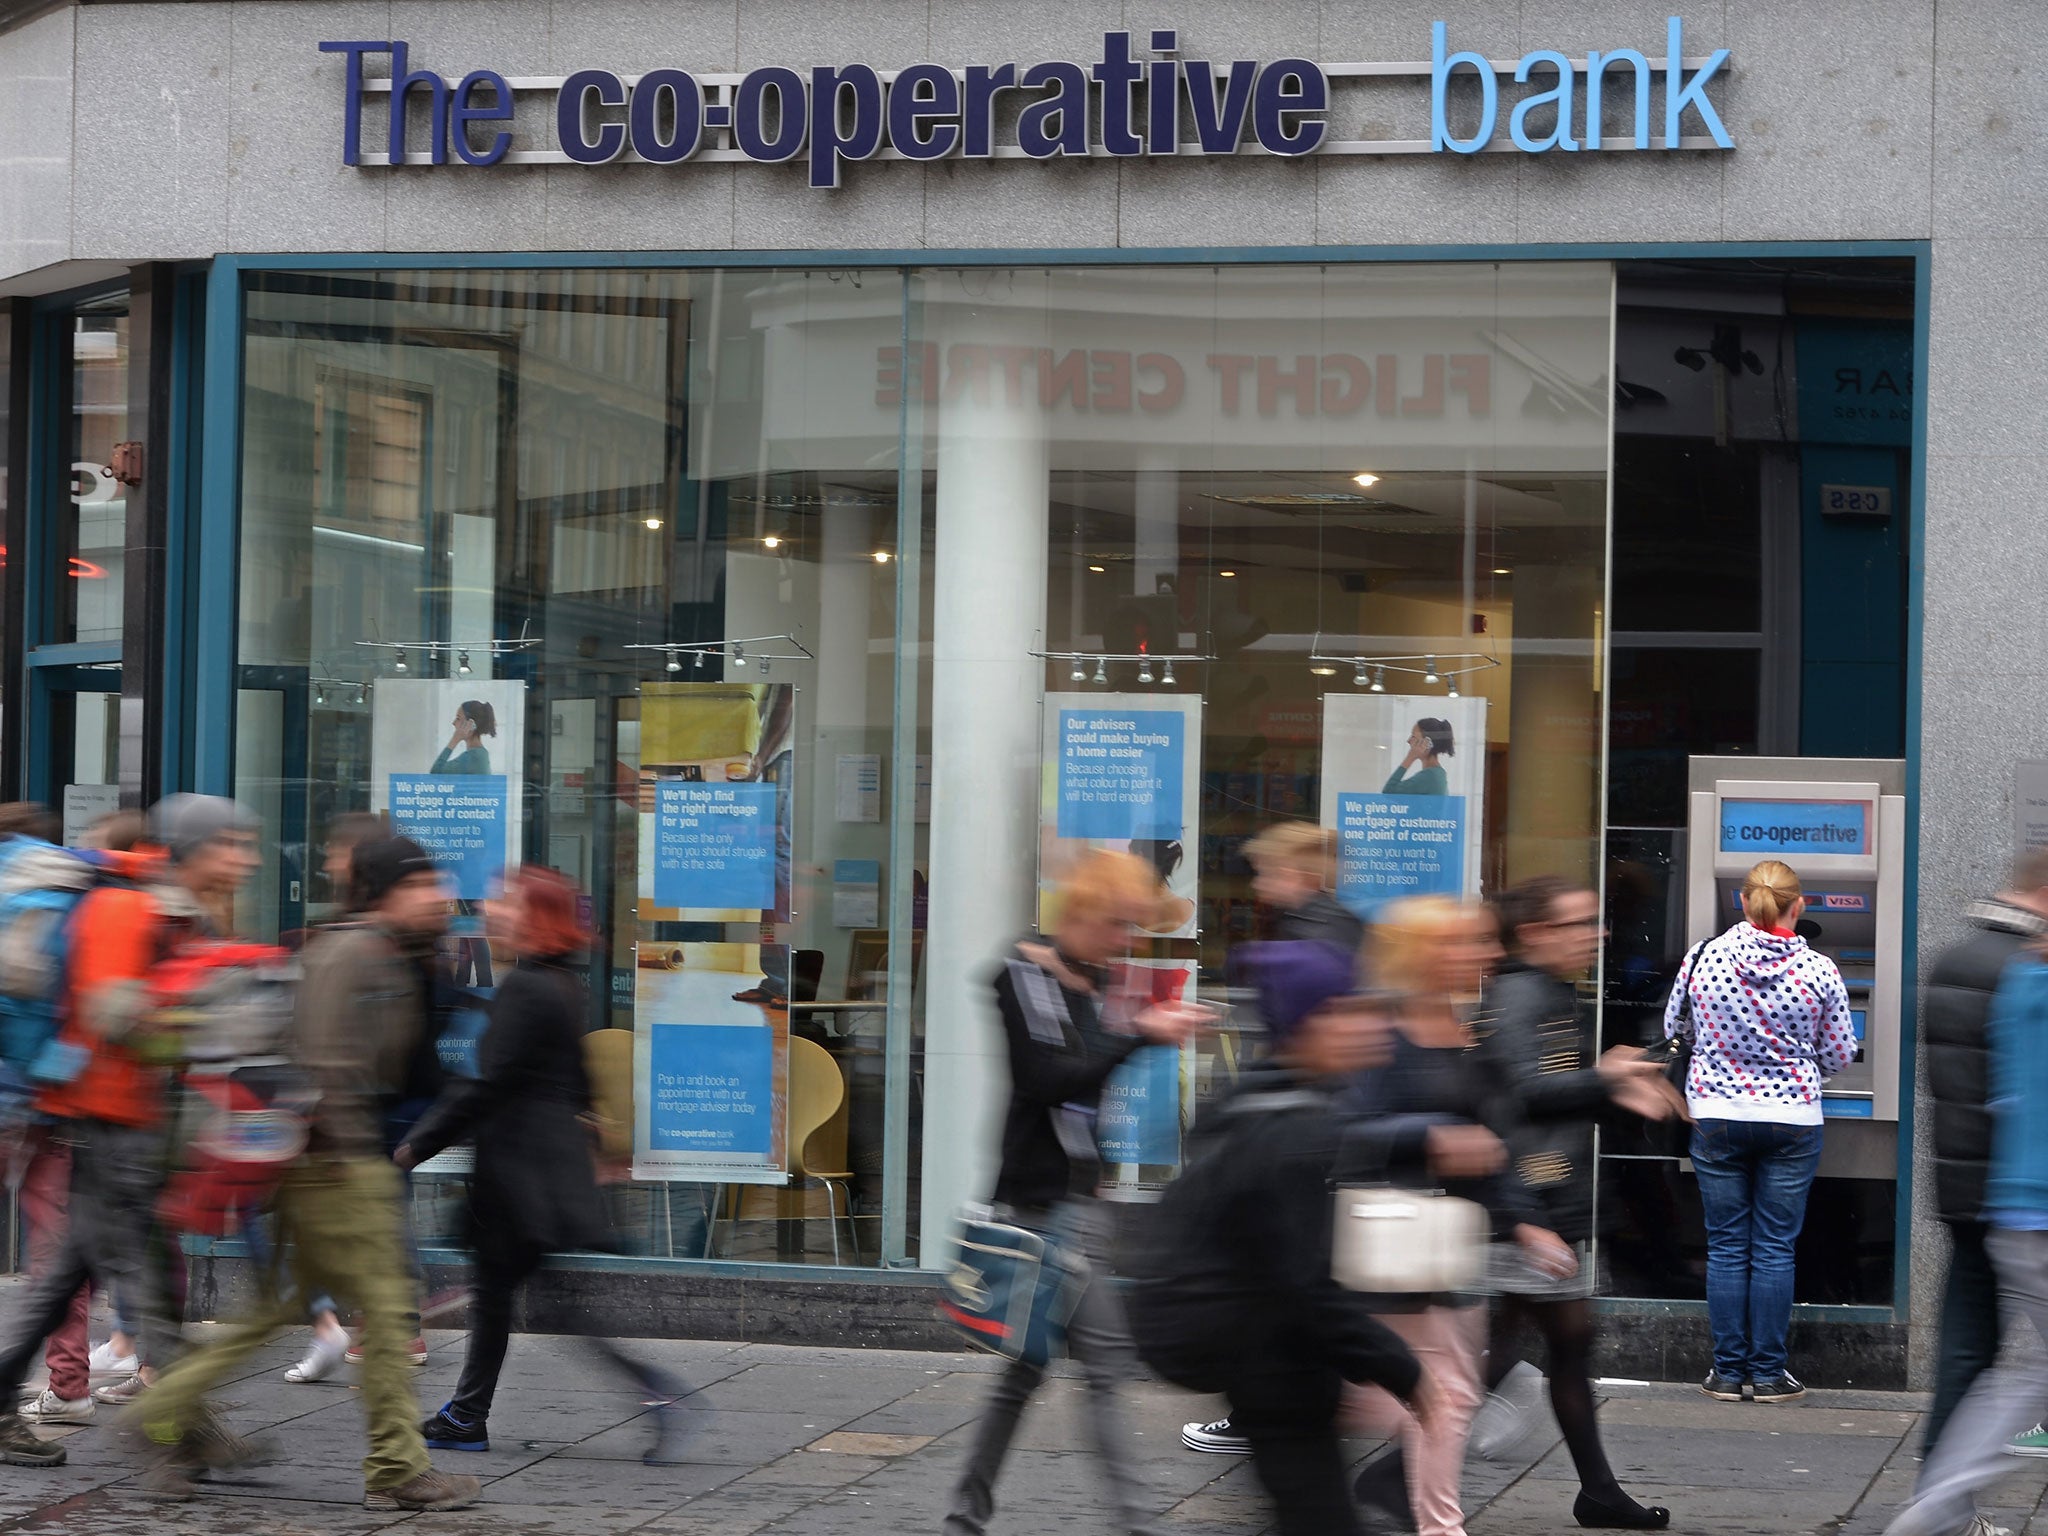 The Cooperative Bank in Glasgow, 2013